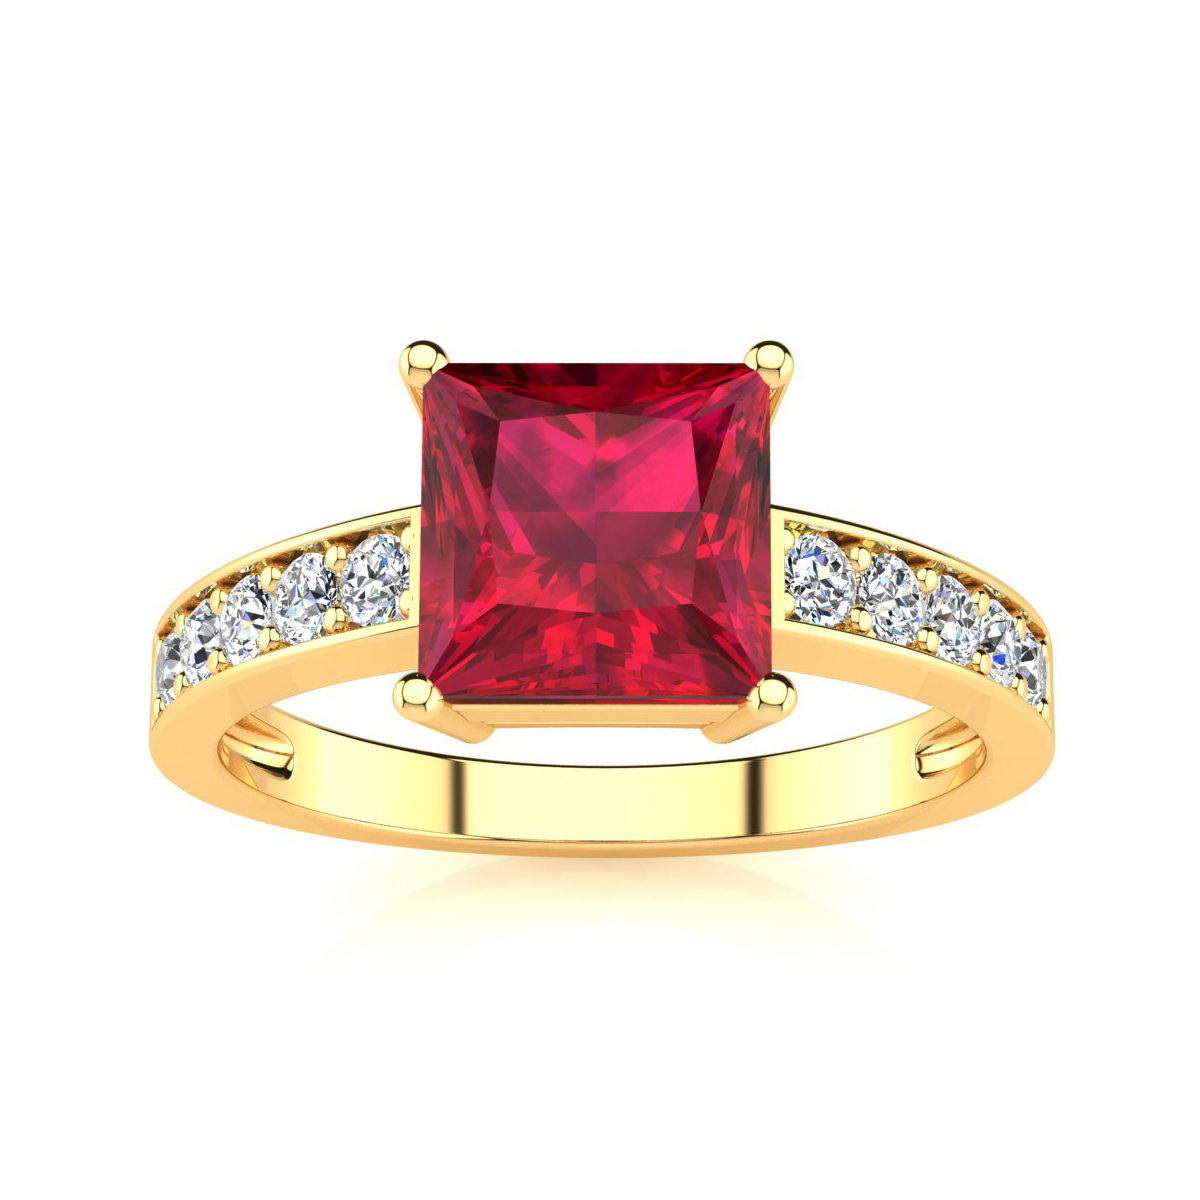 CM-RM911X-07 14k Yellow Gold Oval Ruby And Diamond Ring 